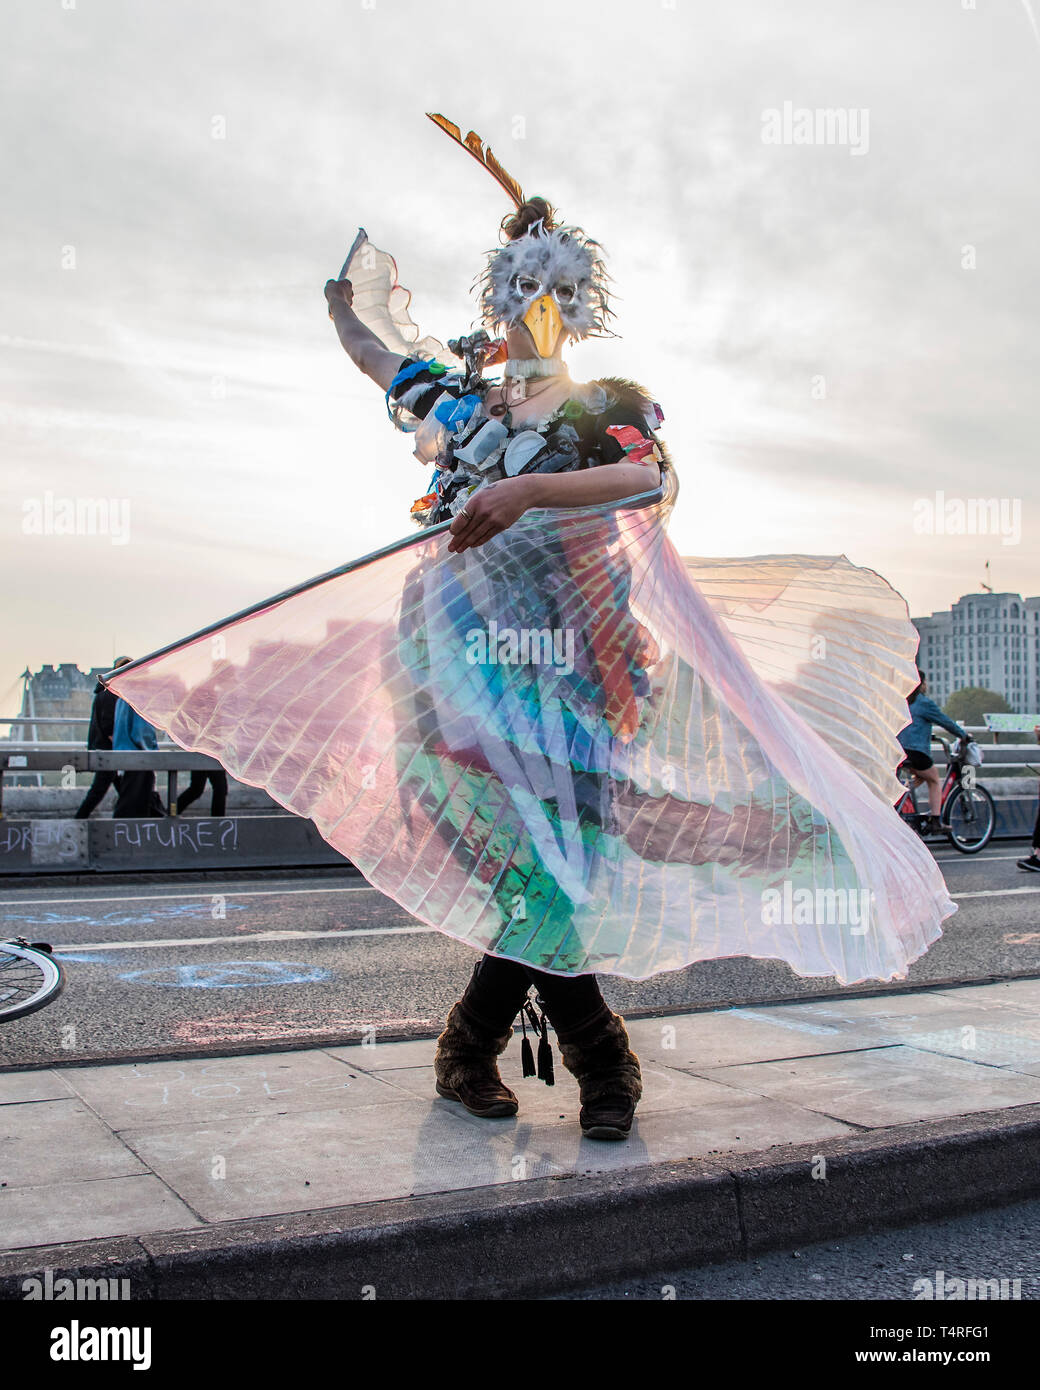 London, UK. 18th Apr 2019. Dancing in a costume representing the plastics being eaten by and then killing sea birds - Evening and the festival atmosphere returns - Day 4 - Protestors from Extinction Rebellion block several junctions in London as part of their ongoing protest to demand action by the UK Government on the 'climate chrisis'. The action is part of an international co-ordinated protest. Credit: Guy Bell/Alamy Live News Stock Photo